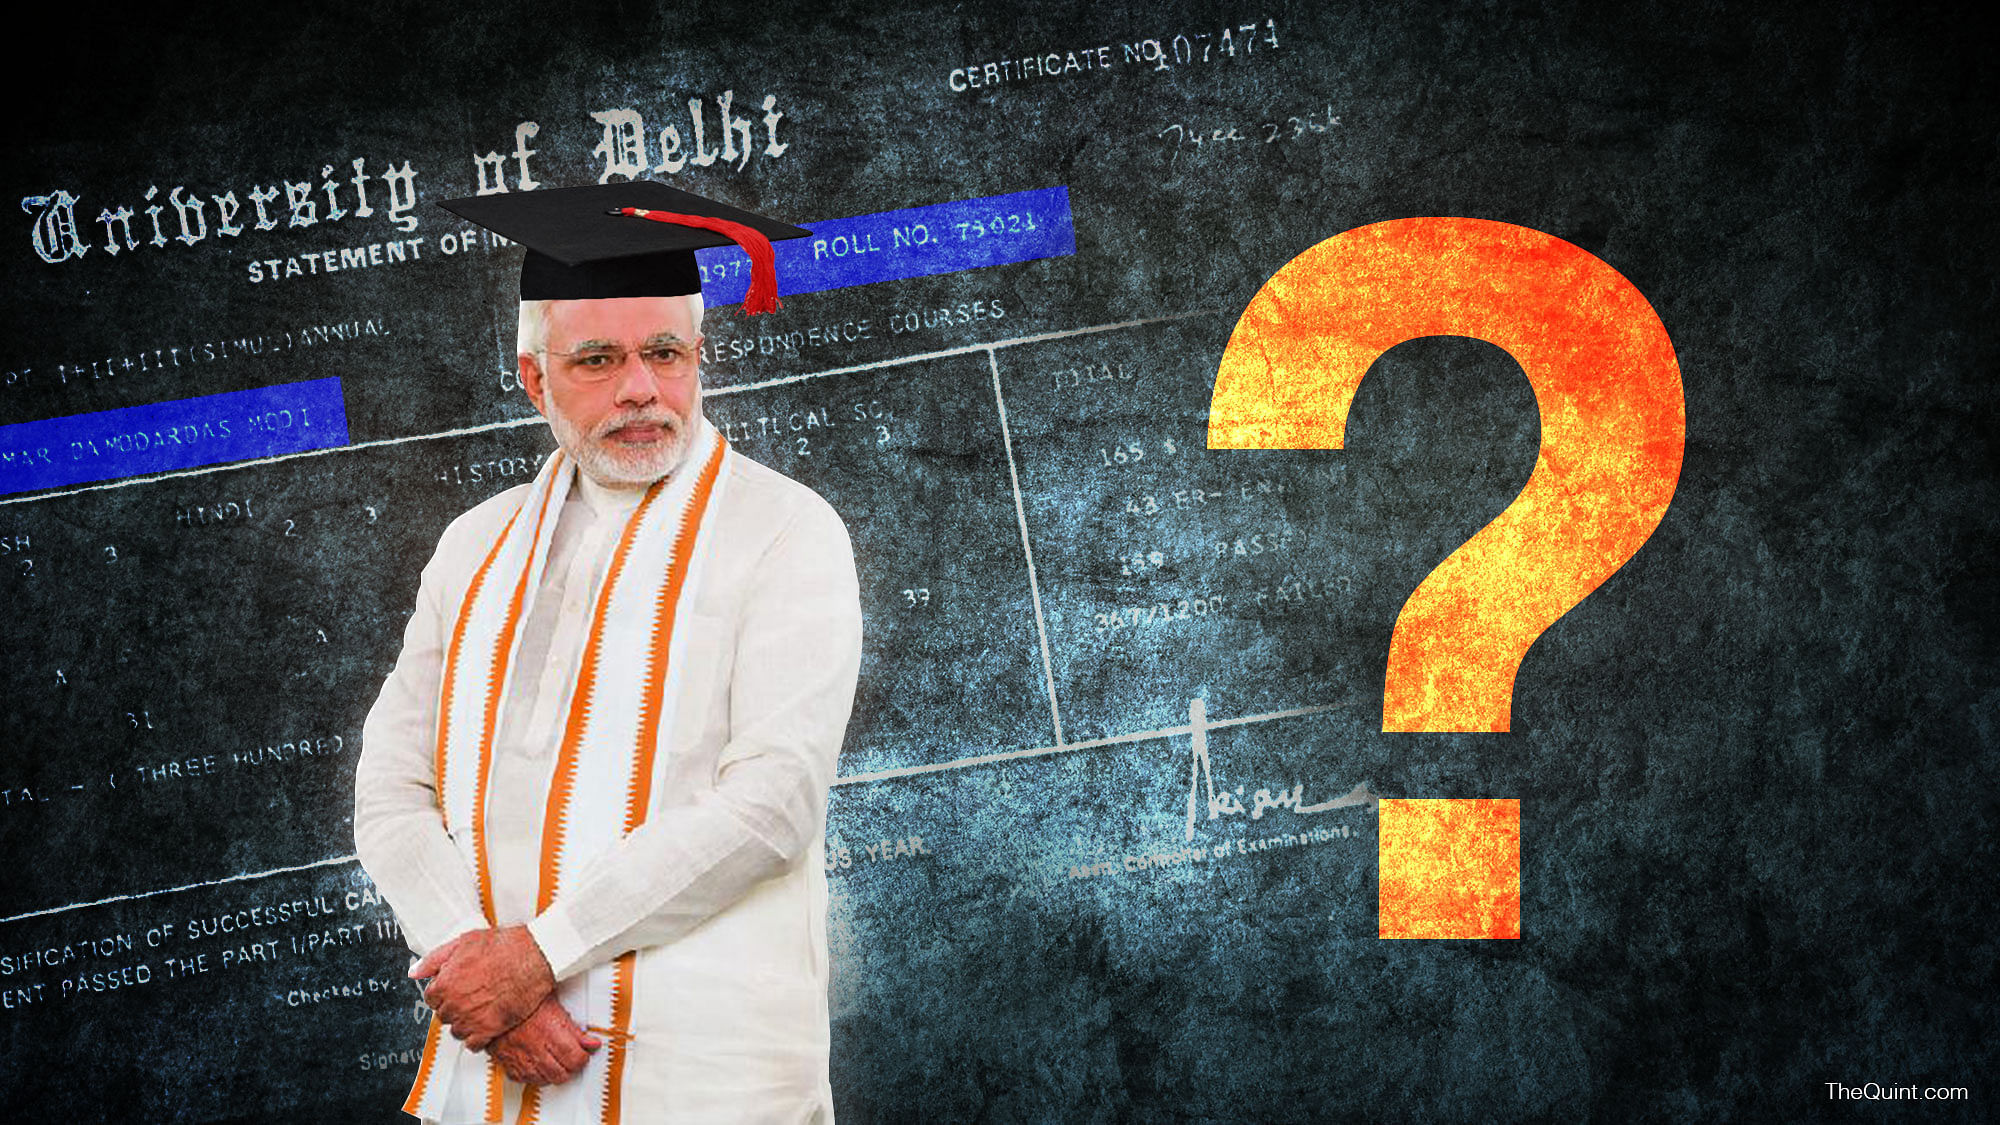 Prime Minister Narendra Modi’s college and university credentials have come under a cloud. The BJP has made efforts to make public certain documents, including Modi’s BA and MA certificates which have thrown up more questions than solid answers that could put the matter to rest. (Photo: <b>The Quint</b>)